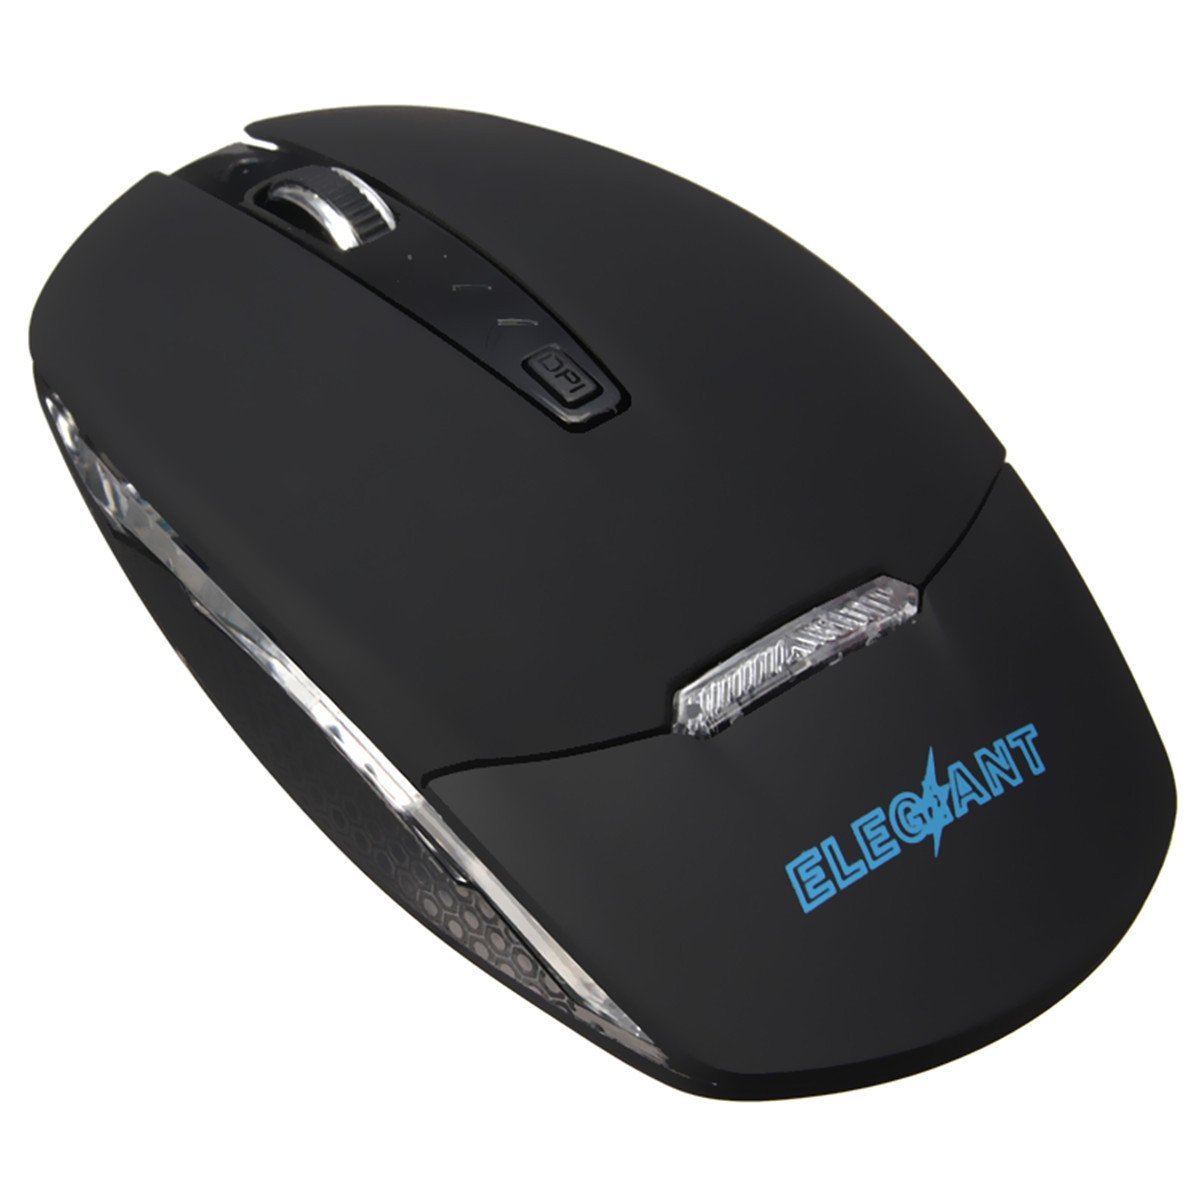 Slim Wireless Cordless Bluetooth Mouse for PC Laptop Macbook Ultrabook Only $2.99 on Amazon!